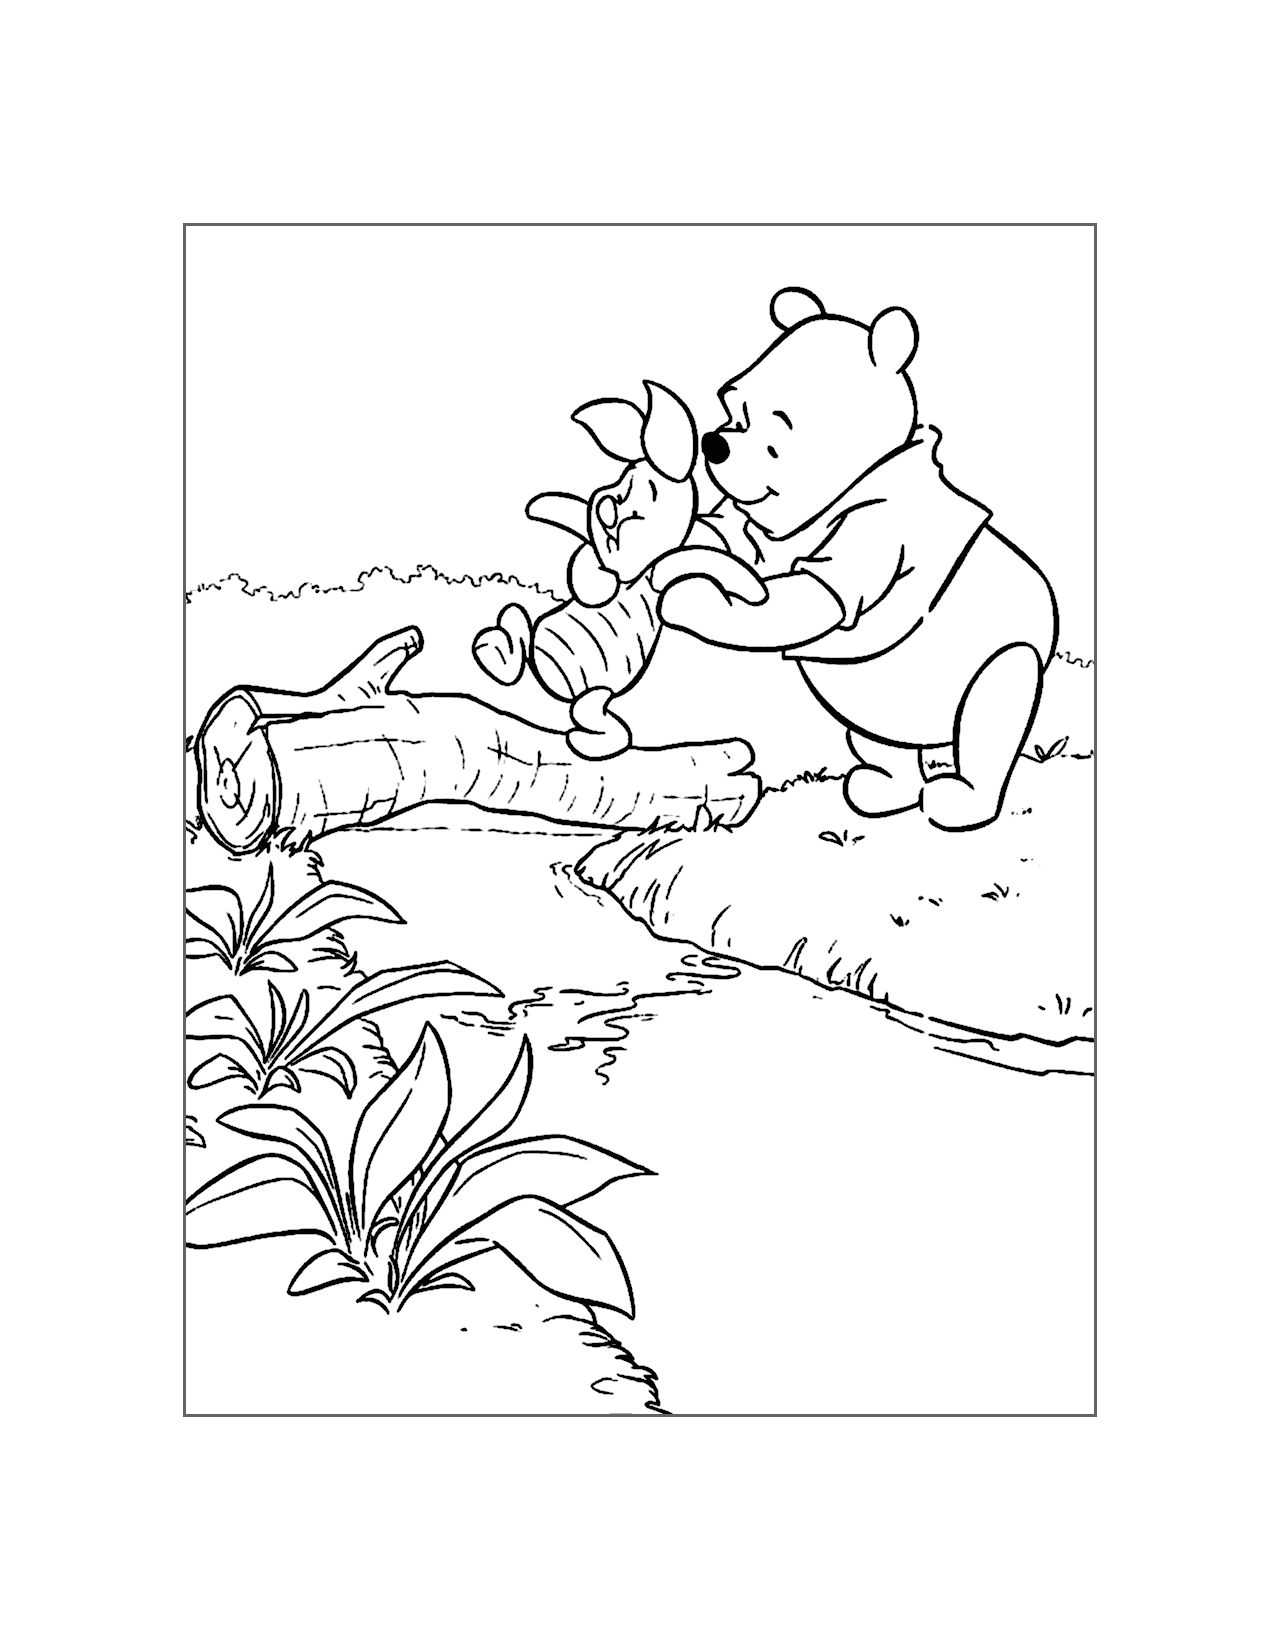 Pooh Helps Piglet Across The Log Coloring Page